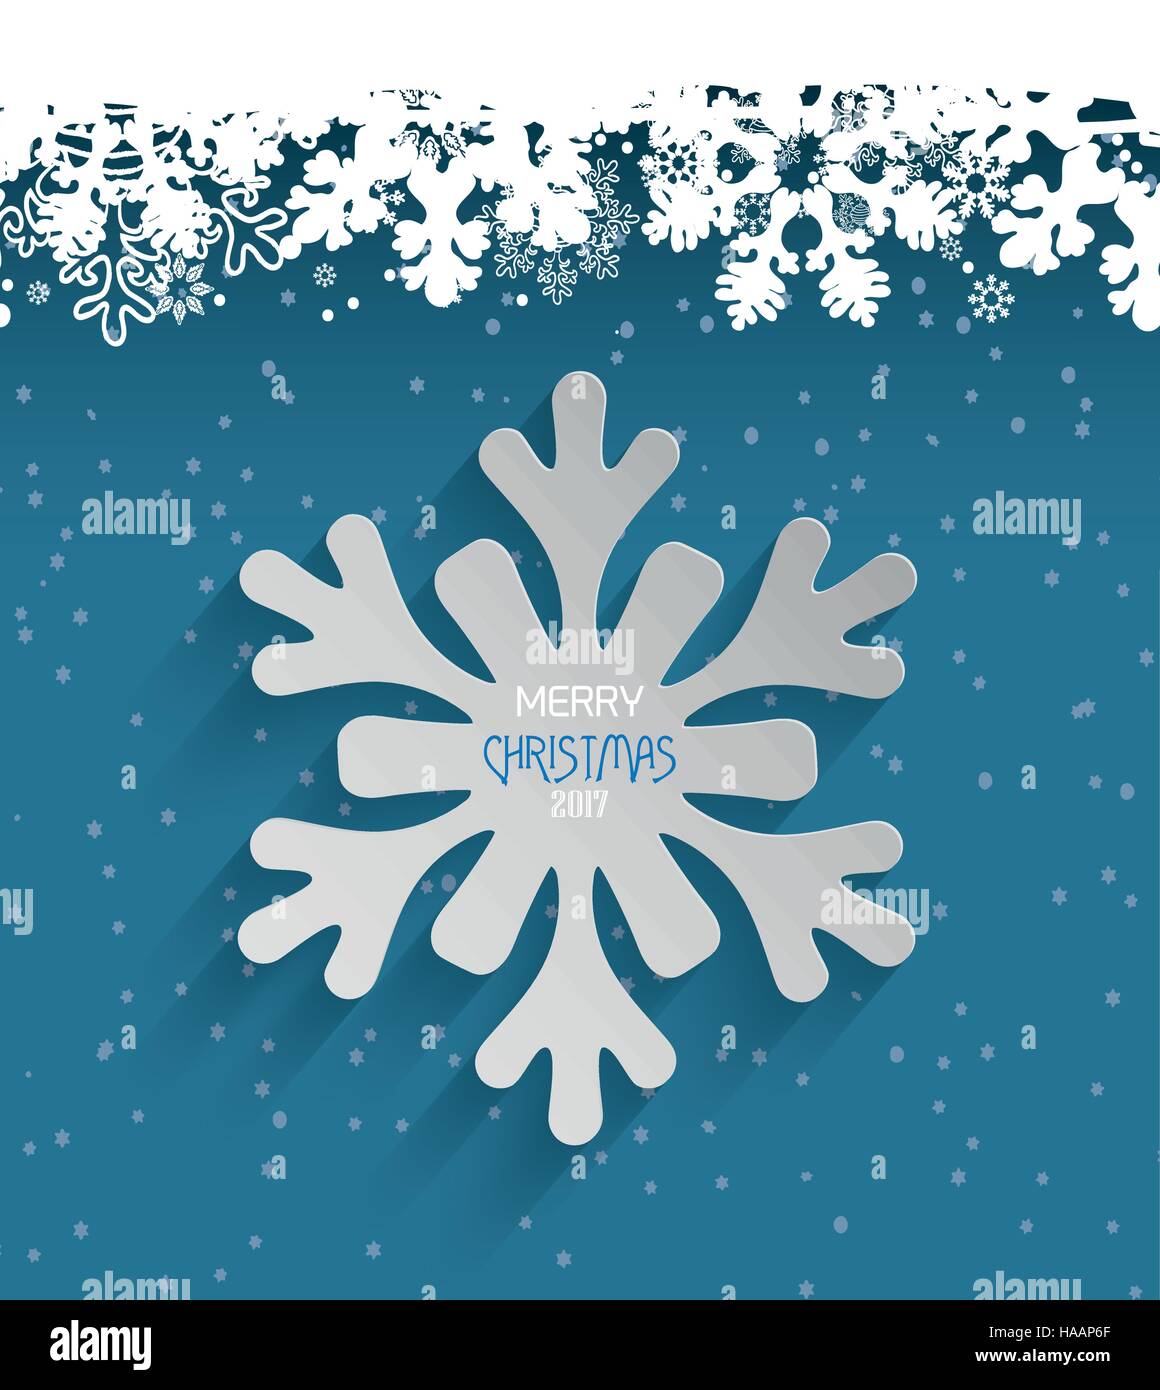 817,818 Snow Flakes Images, Stock Photos, 3D objects, & Vectors